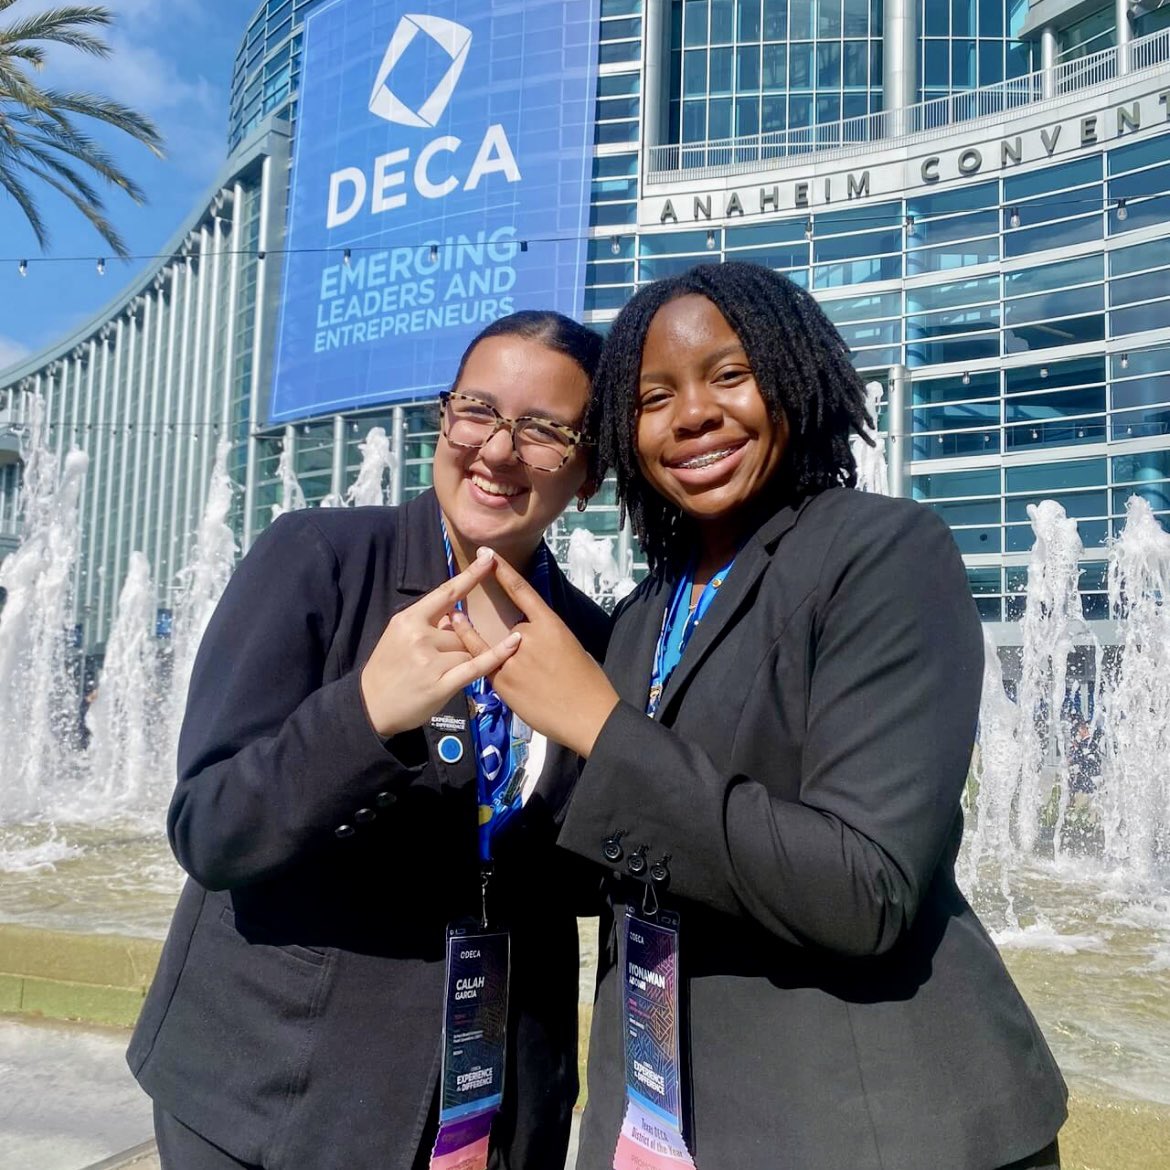 Proud of our varsity athletes who participated in the DECA International Career Development Conference this weekend. Great job Calah and Iyona! #studentathletes #FMG @leisd @LE_DECA @LEISDAthletics @LittleElmHS